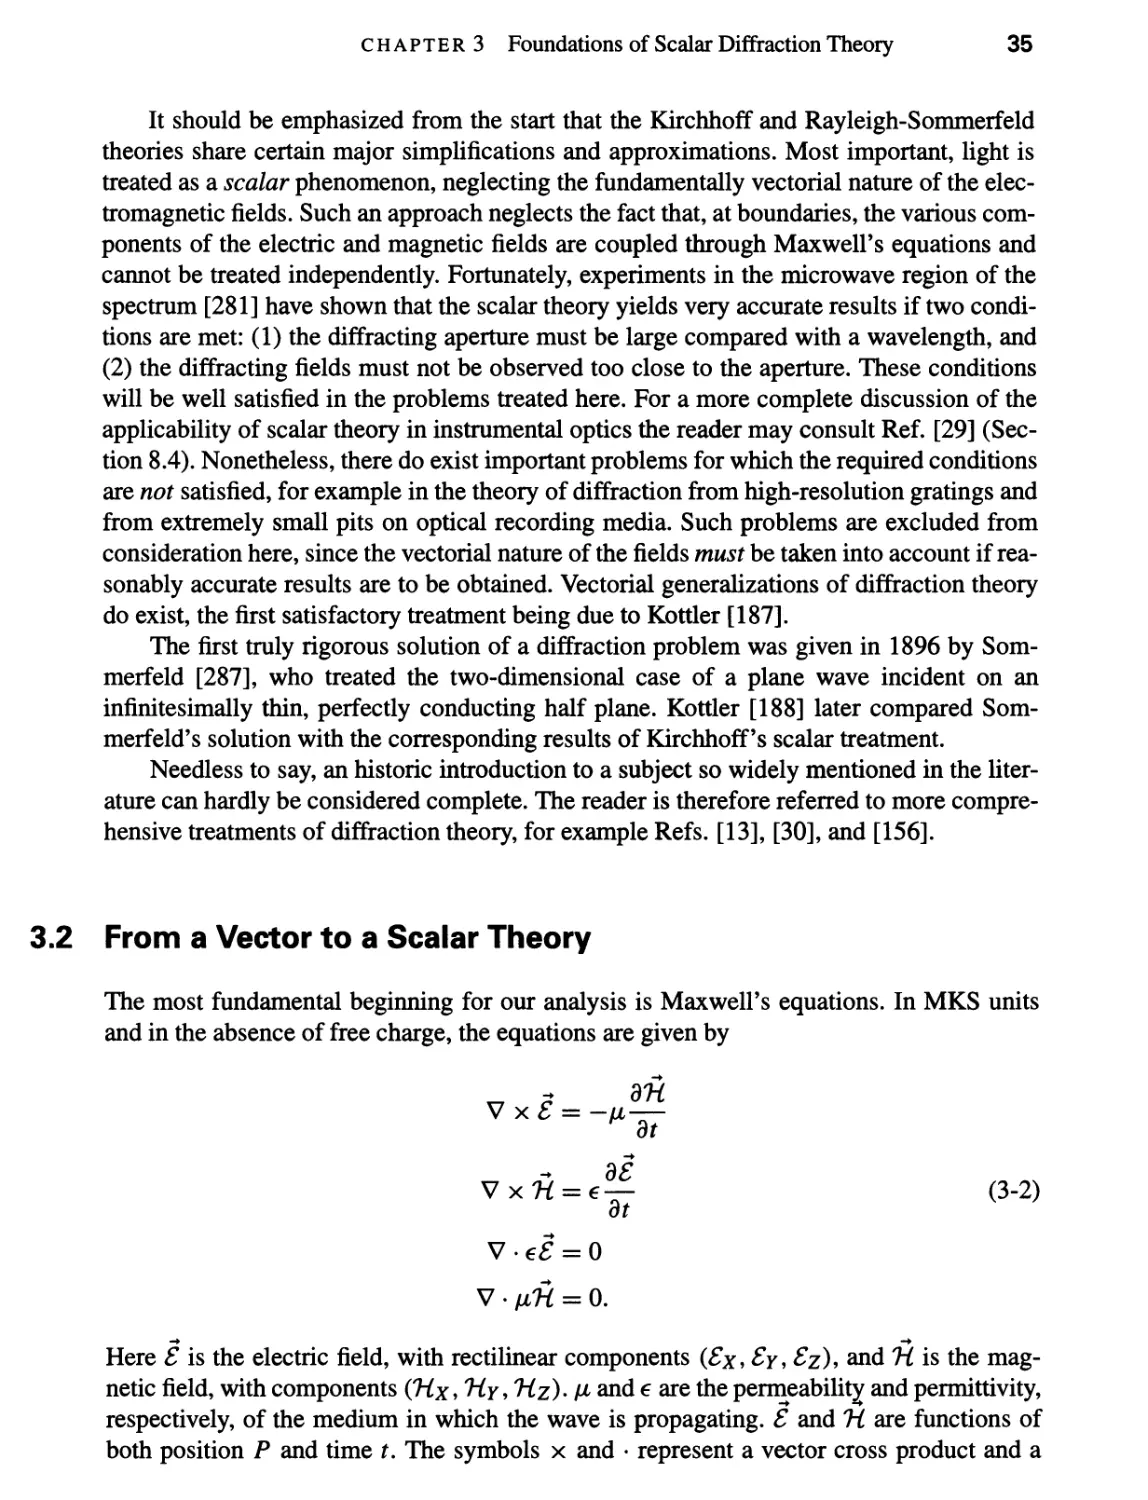 3.2 From a Vector to a Scalar Theory 35